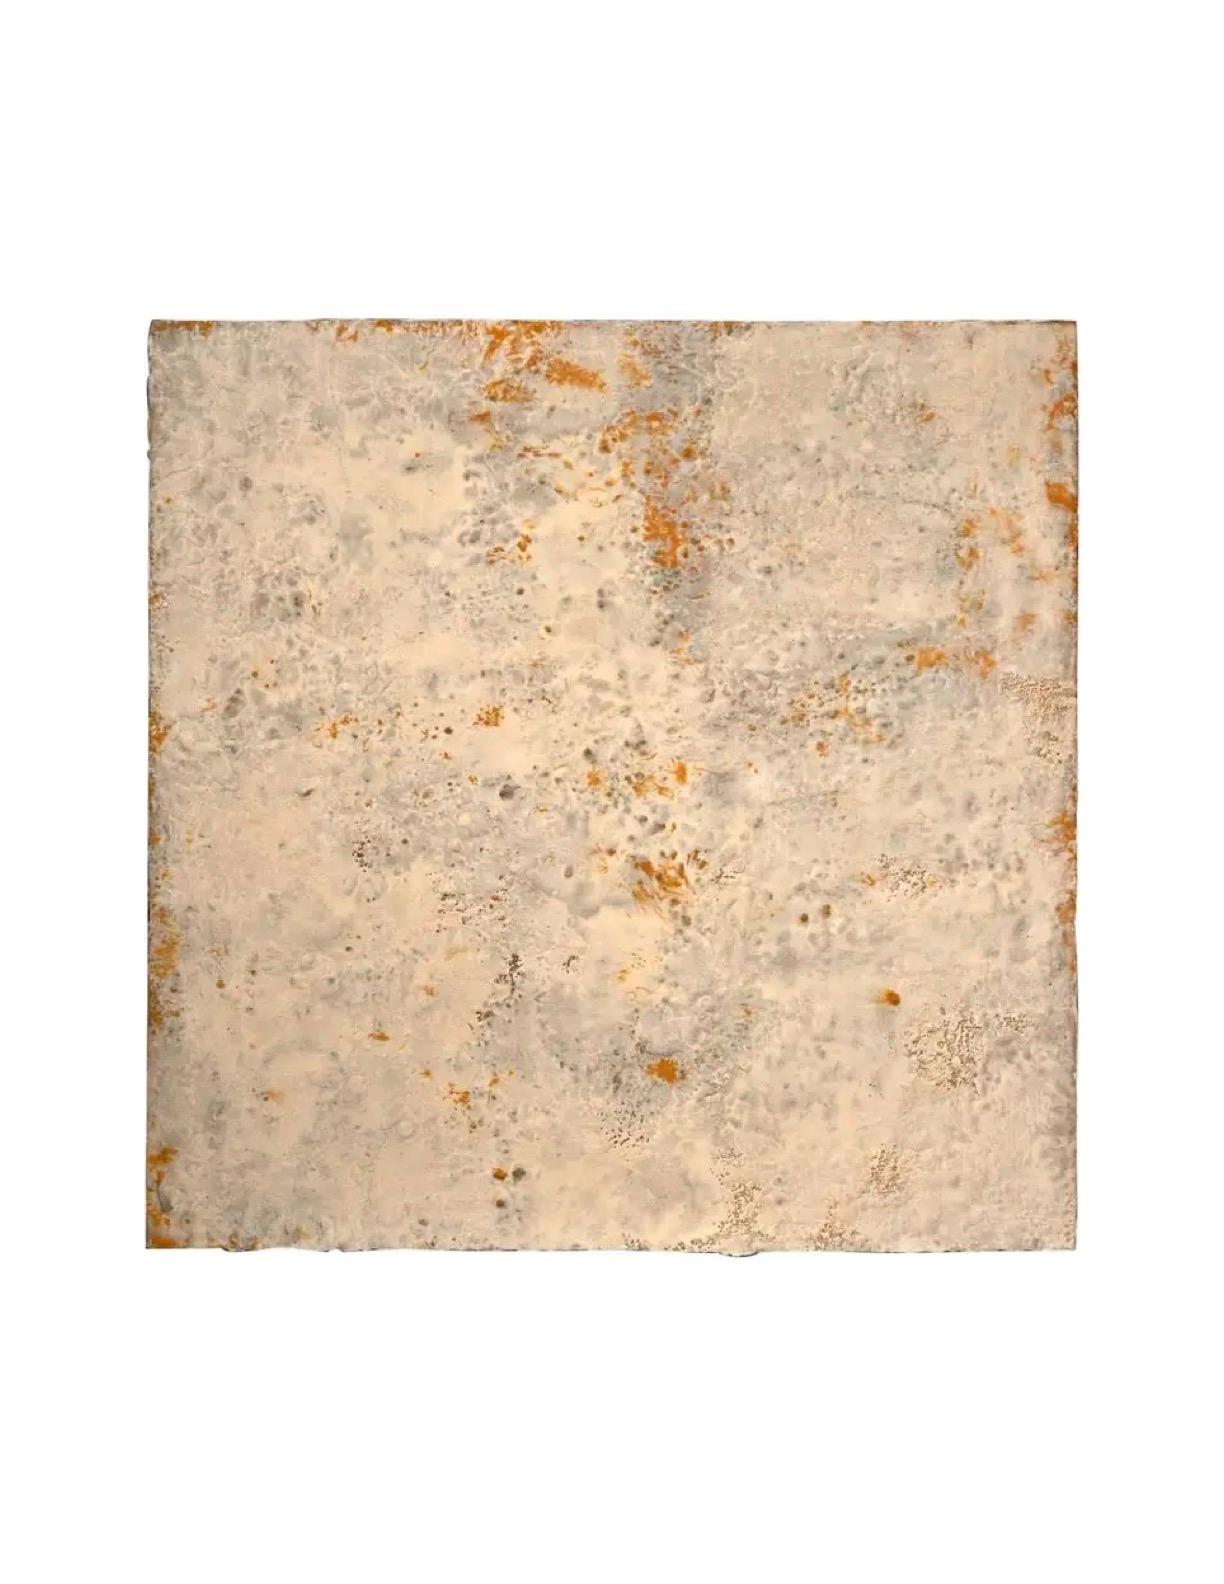 Modern Richard Hirsch Encaustic Painting of Nothing #3L, 2013 For Sale